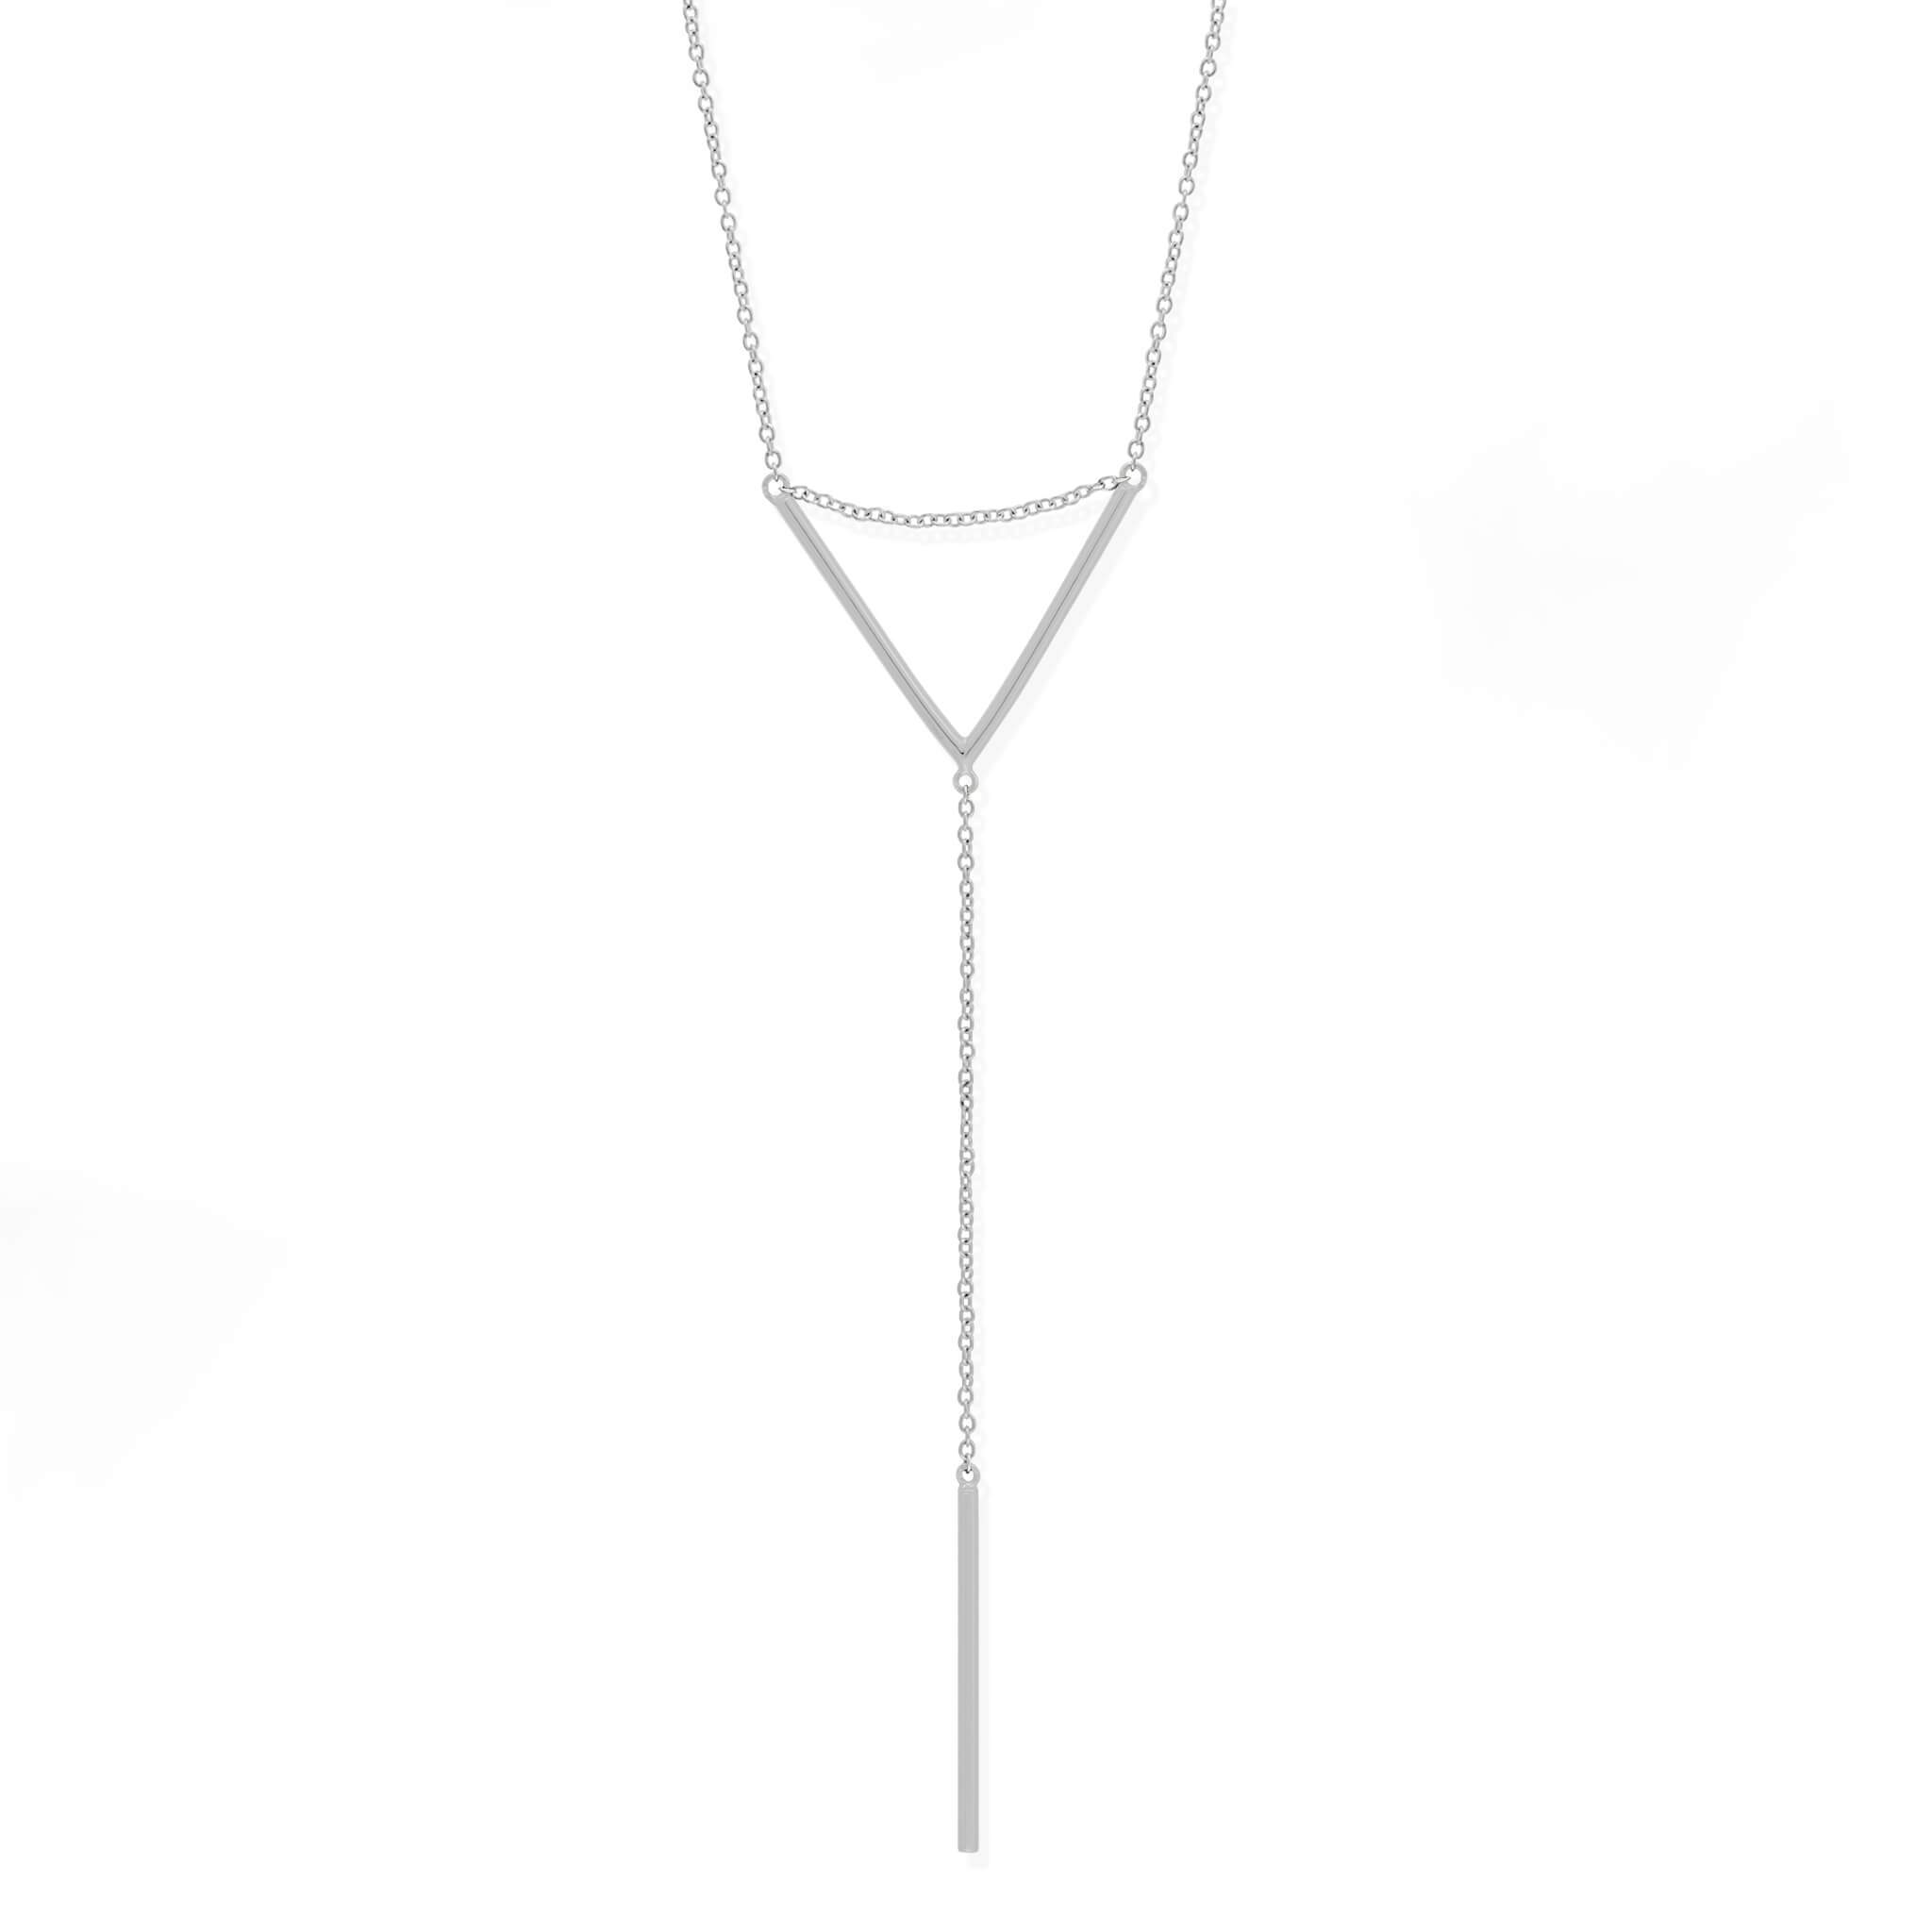 Boma Jewelry Necklaces Belle Lariat Necklace